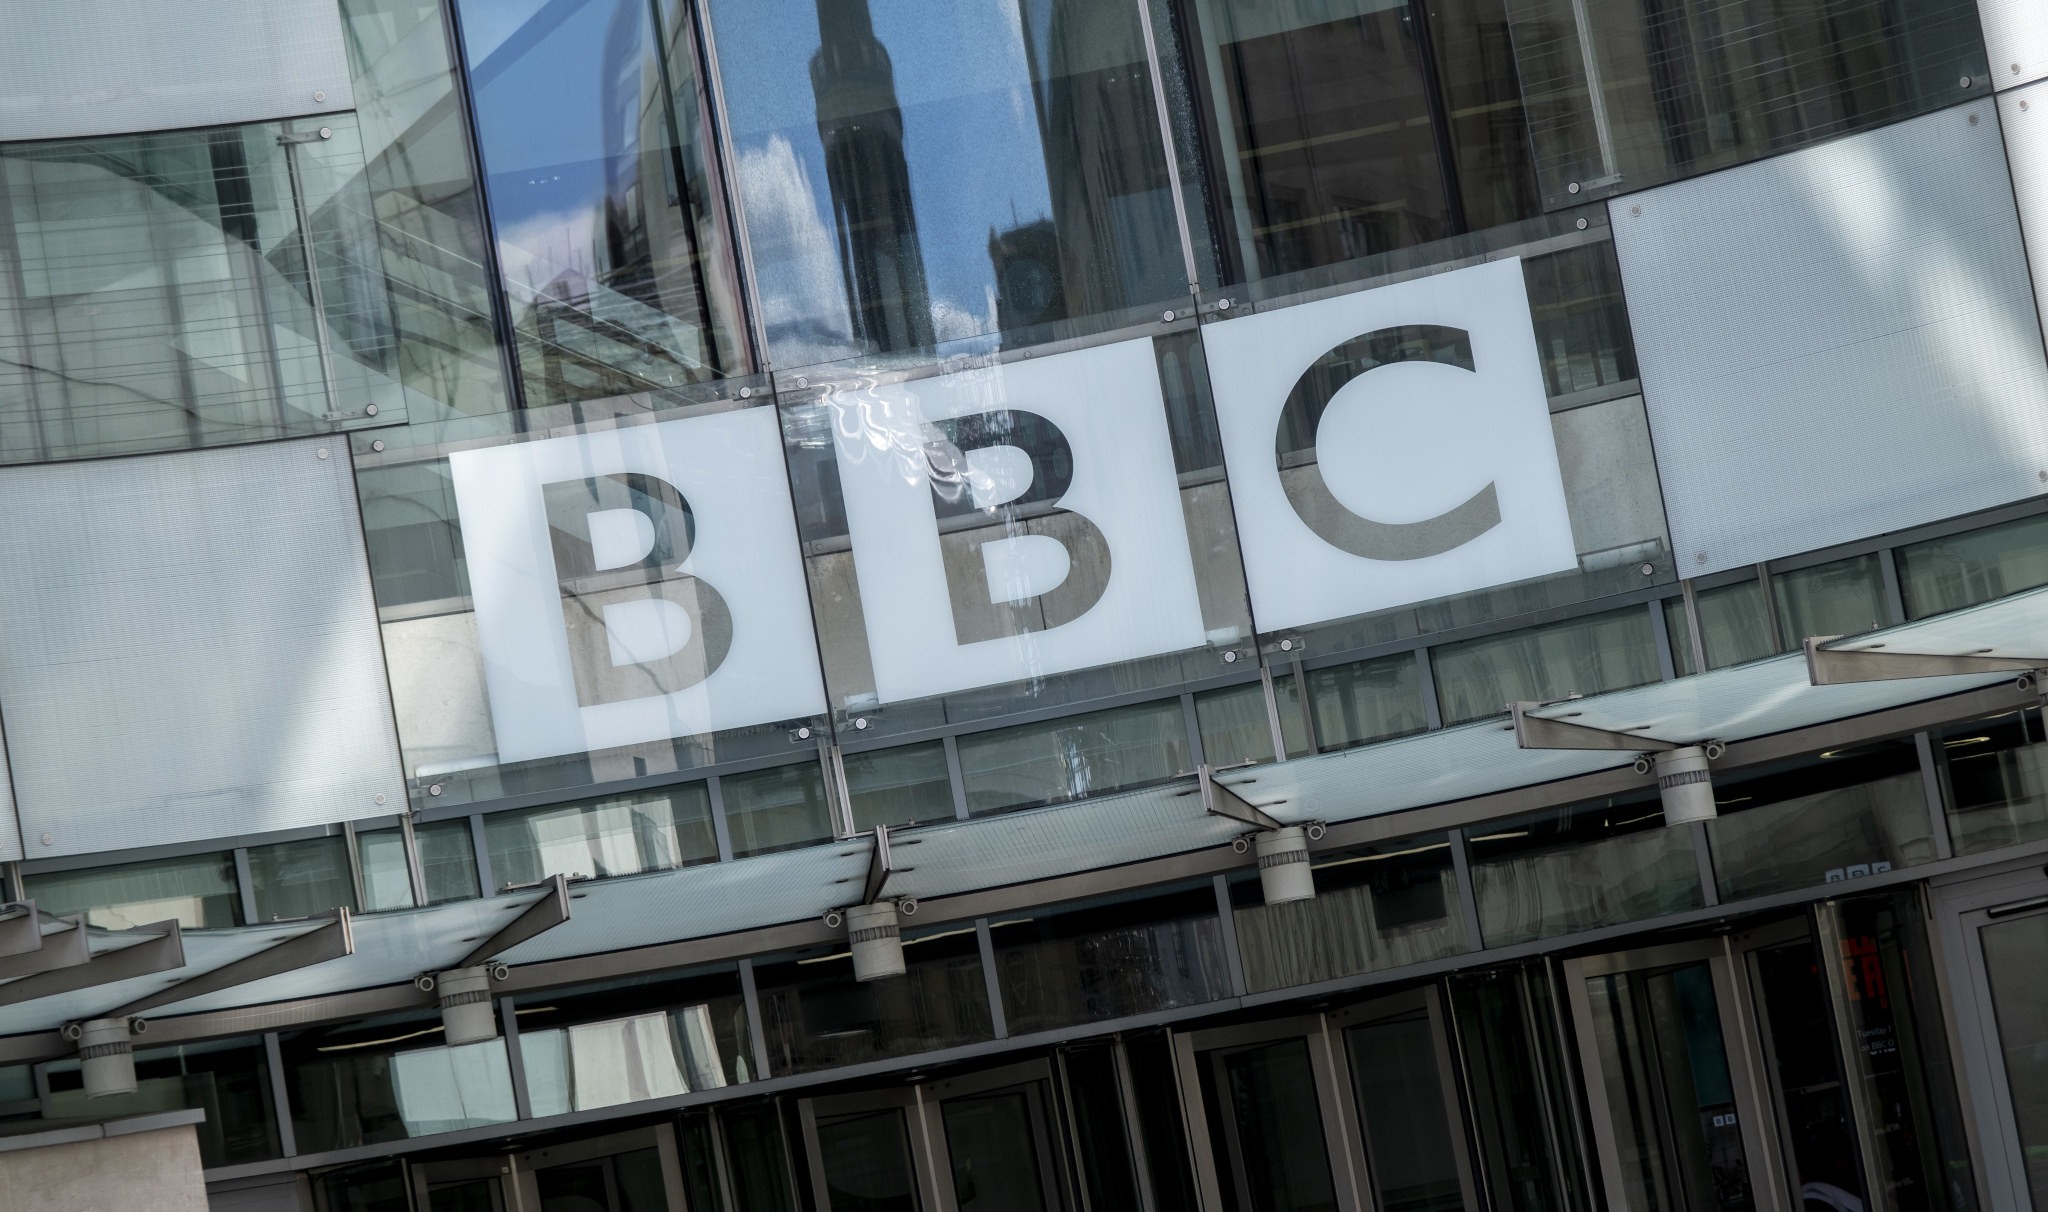 Stopping ‘subversives’: The BBC and the spooks